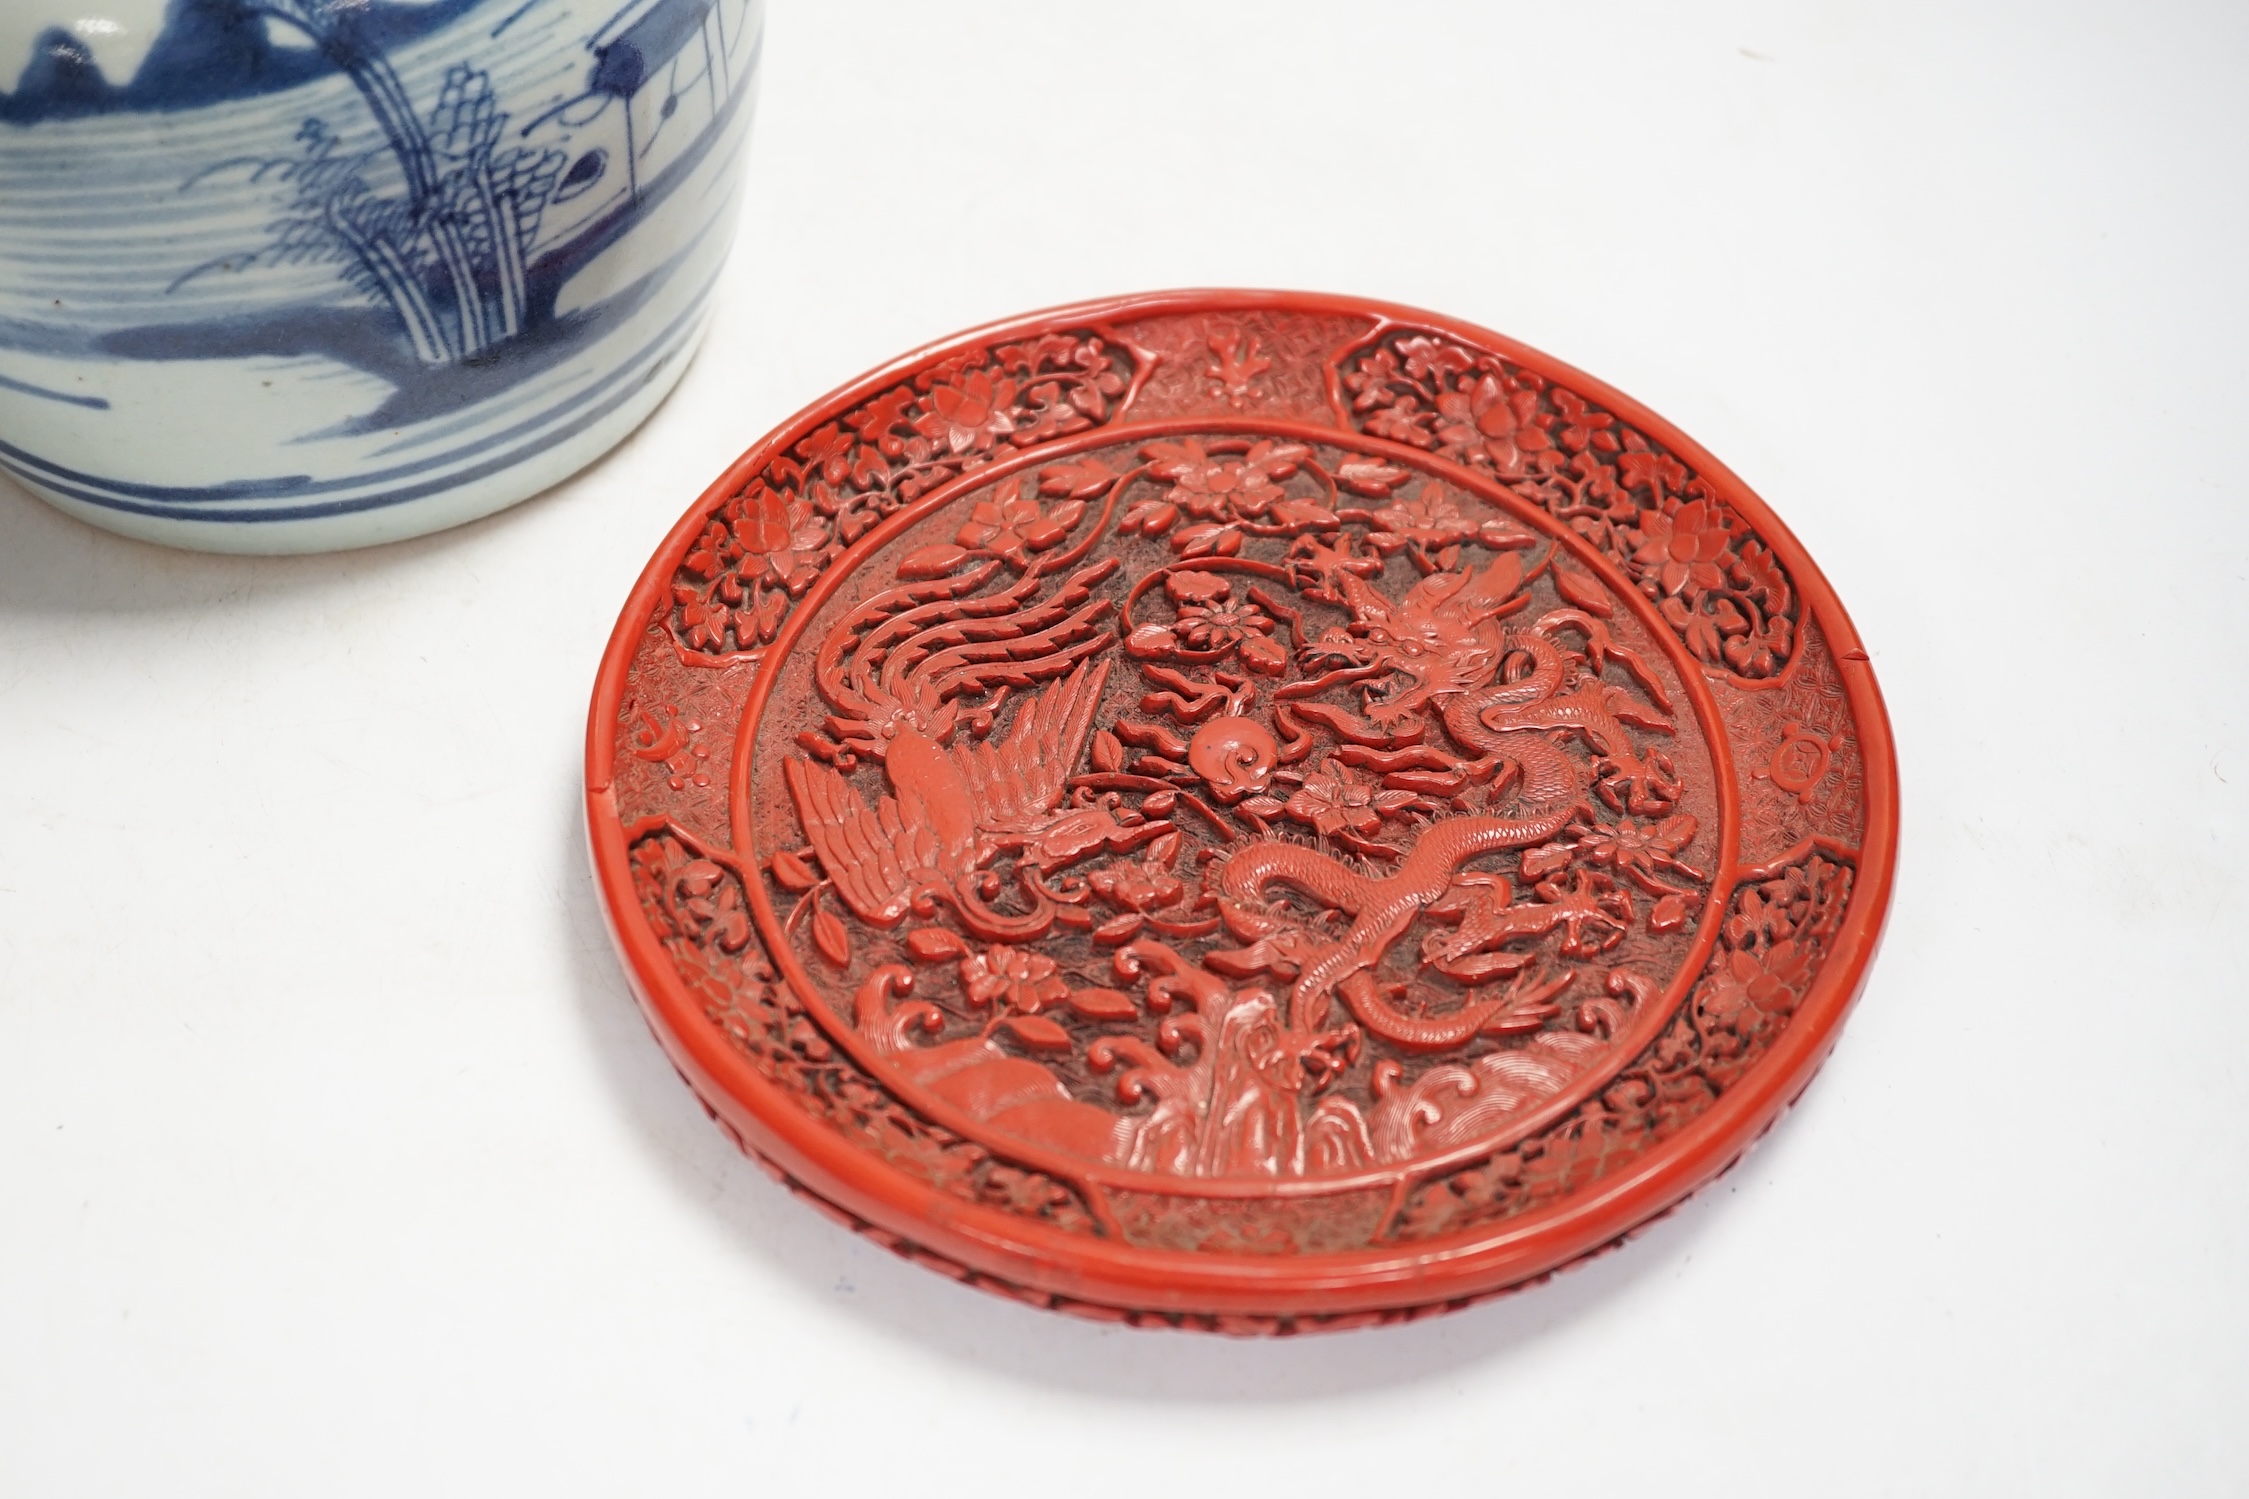 A Chinese blue and white jar and red cinnabar style lacquer tray, jar 16.5cm high. Condition - fair